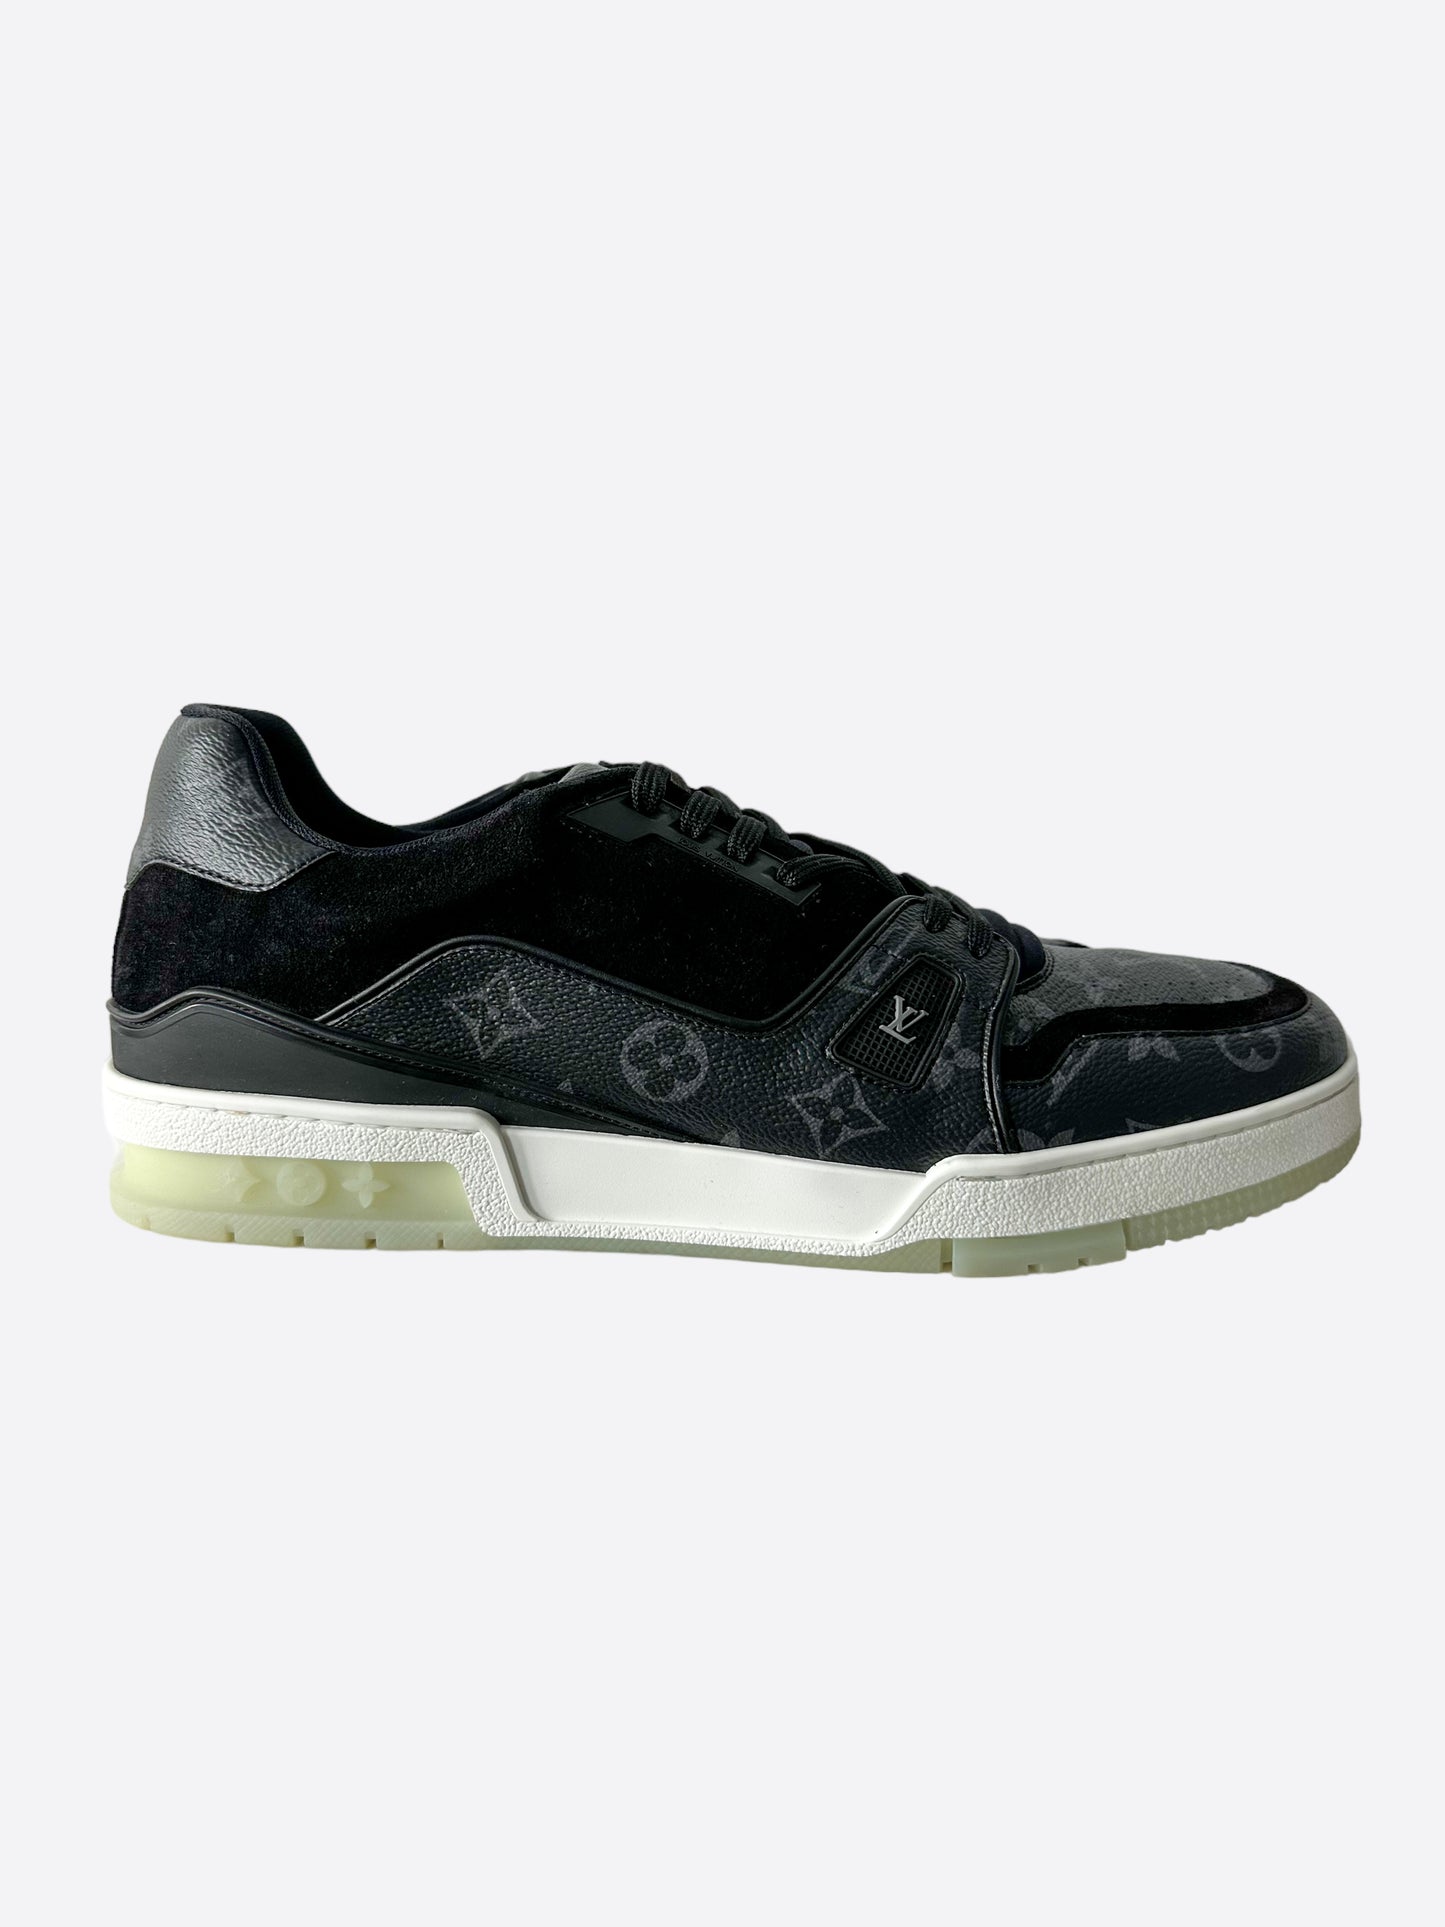 LV Trainers Eclipse new